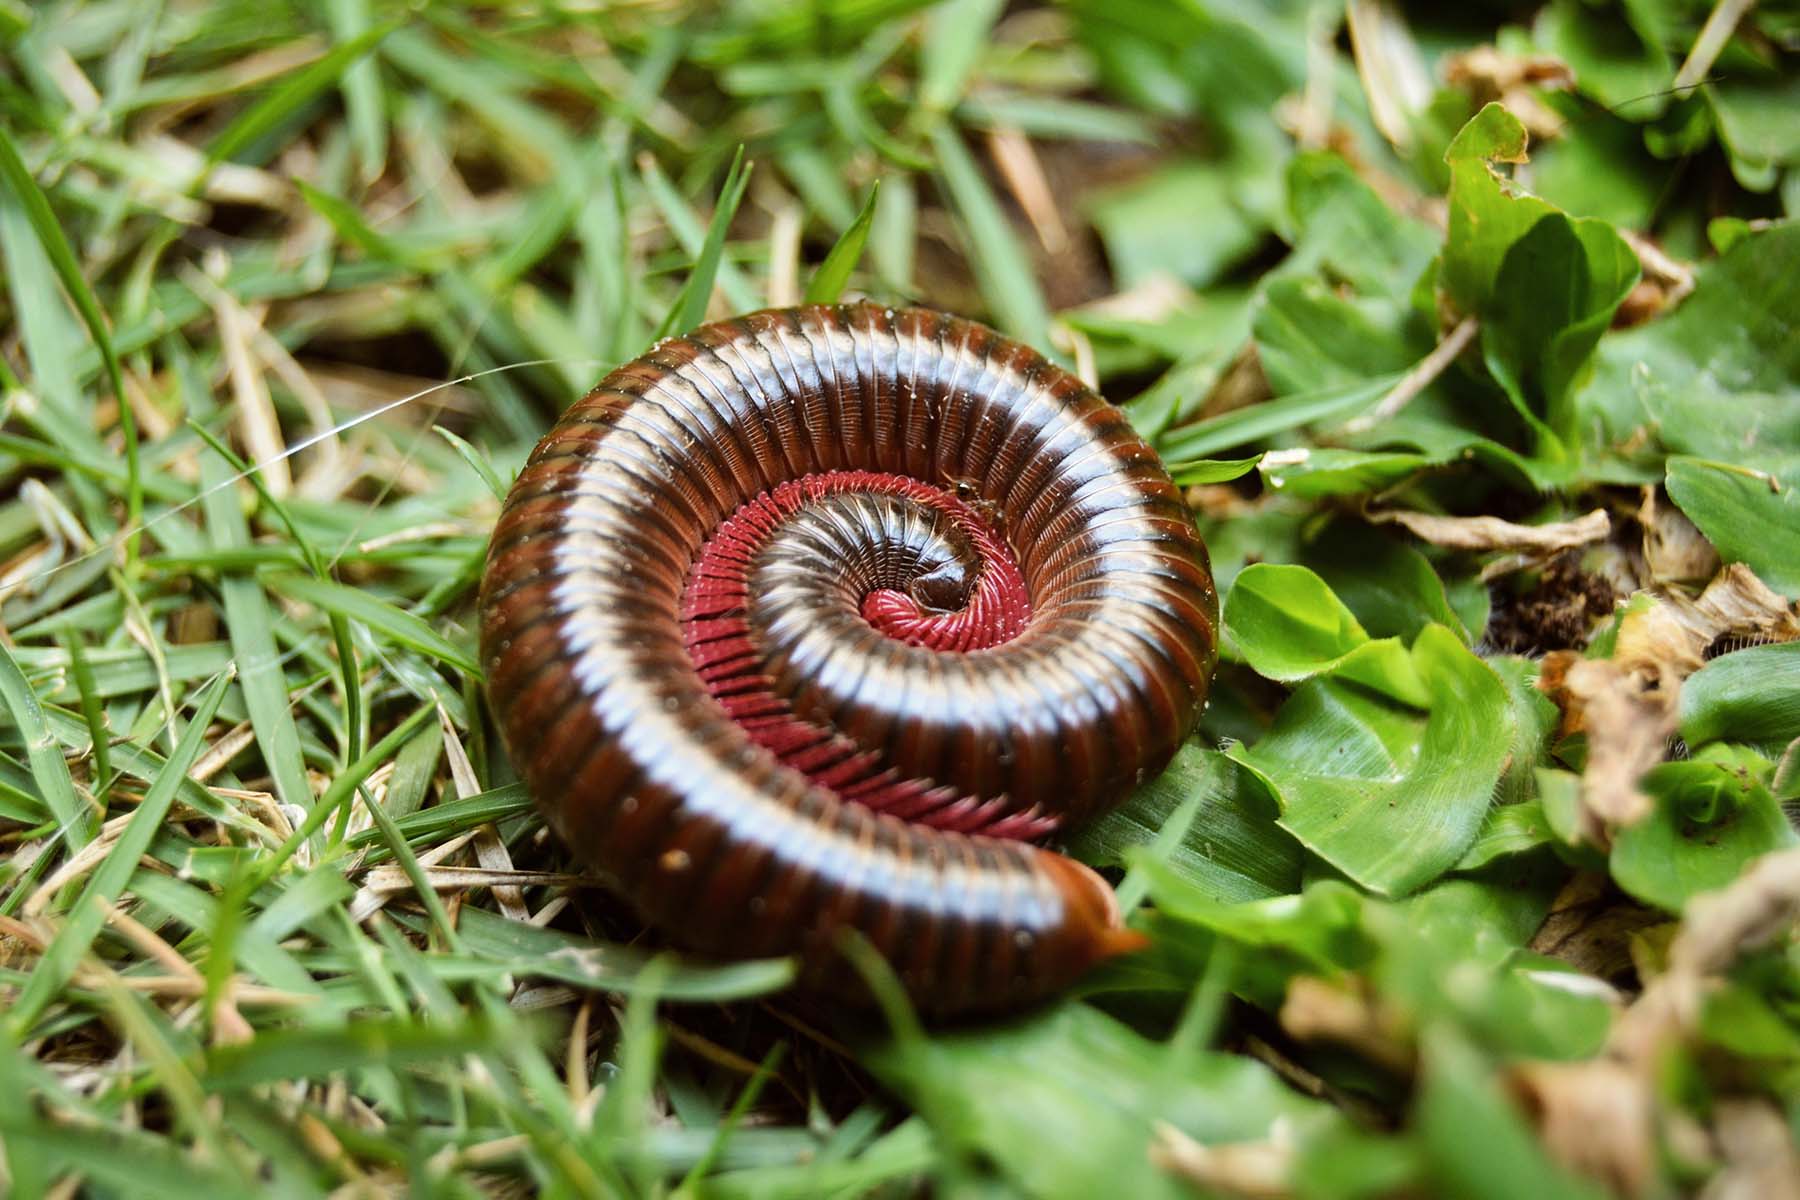 Common Houseplant Pests: How to Deal with Millipedes